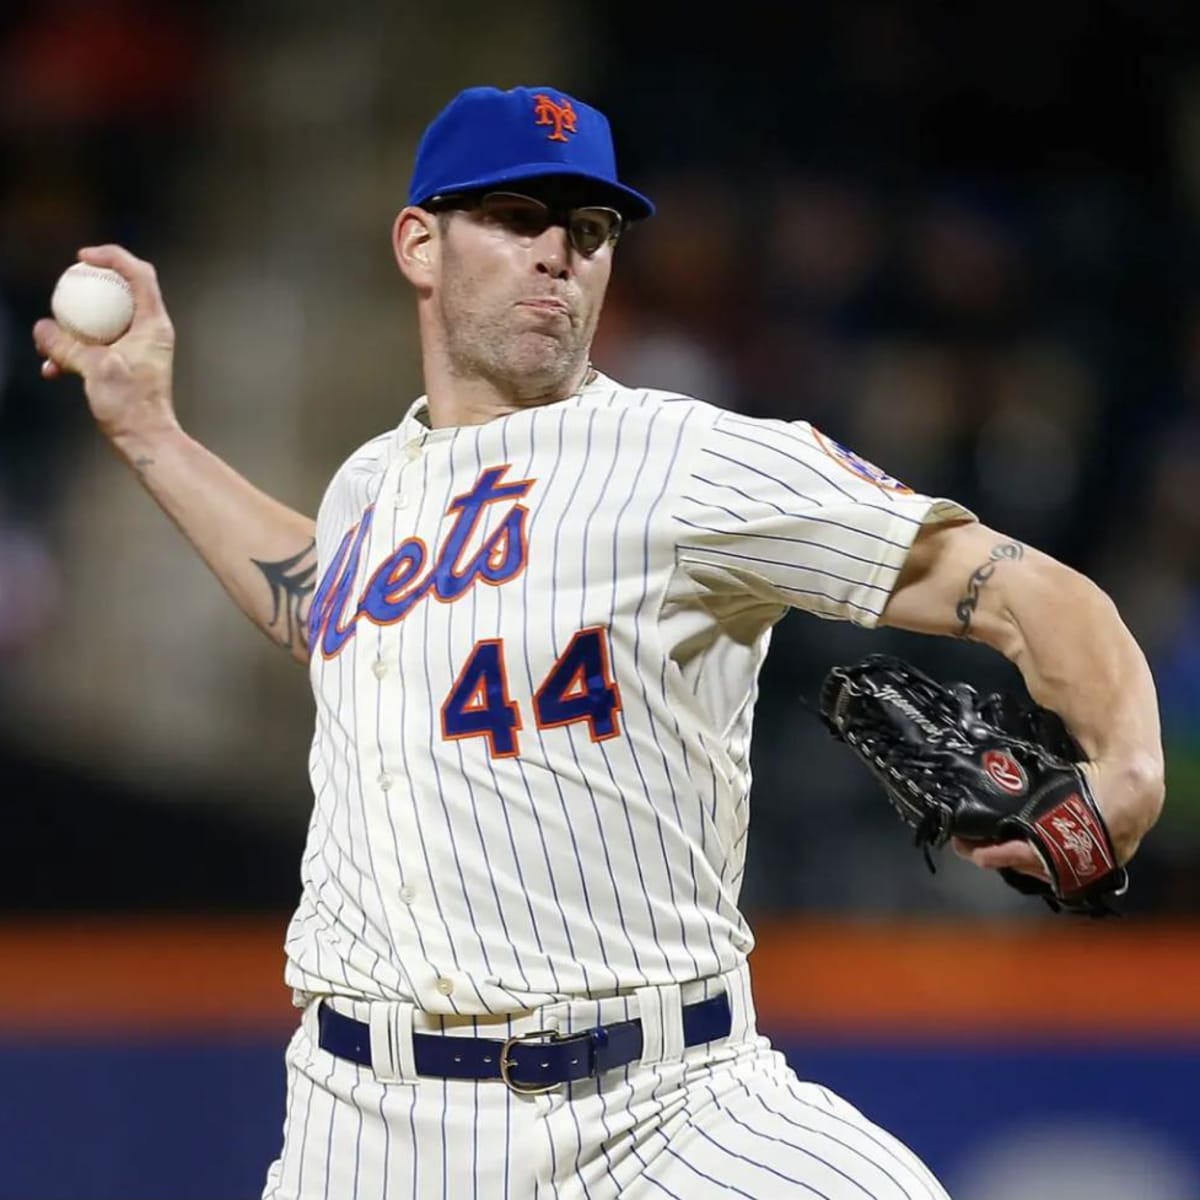 Mets pitcher on his amazin' weight loss and transformation